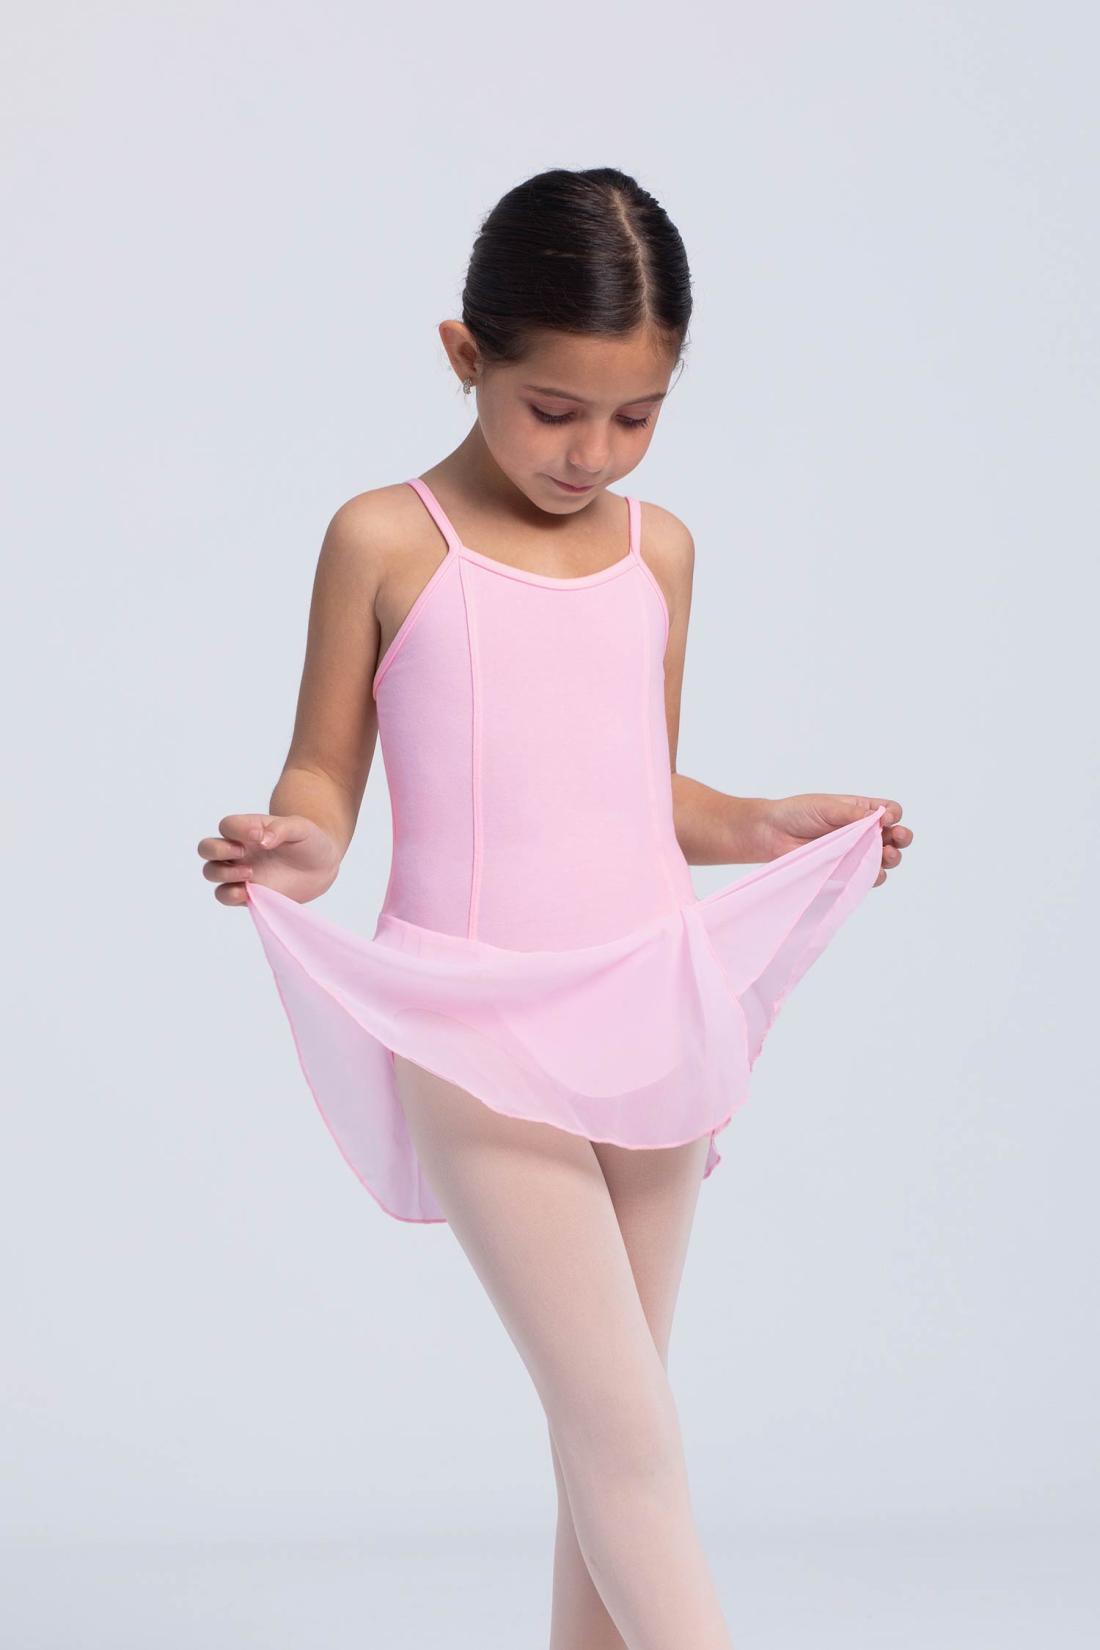 Camisole ballet pink dress for girls in Cotton fabric and chiffon skirt Intermezzo dance